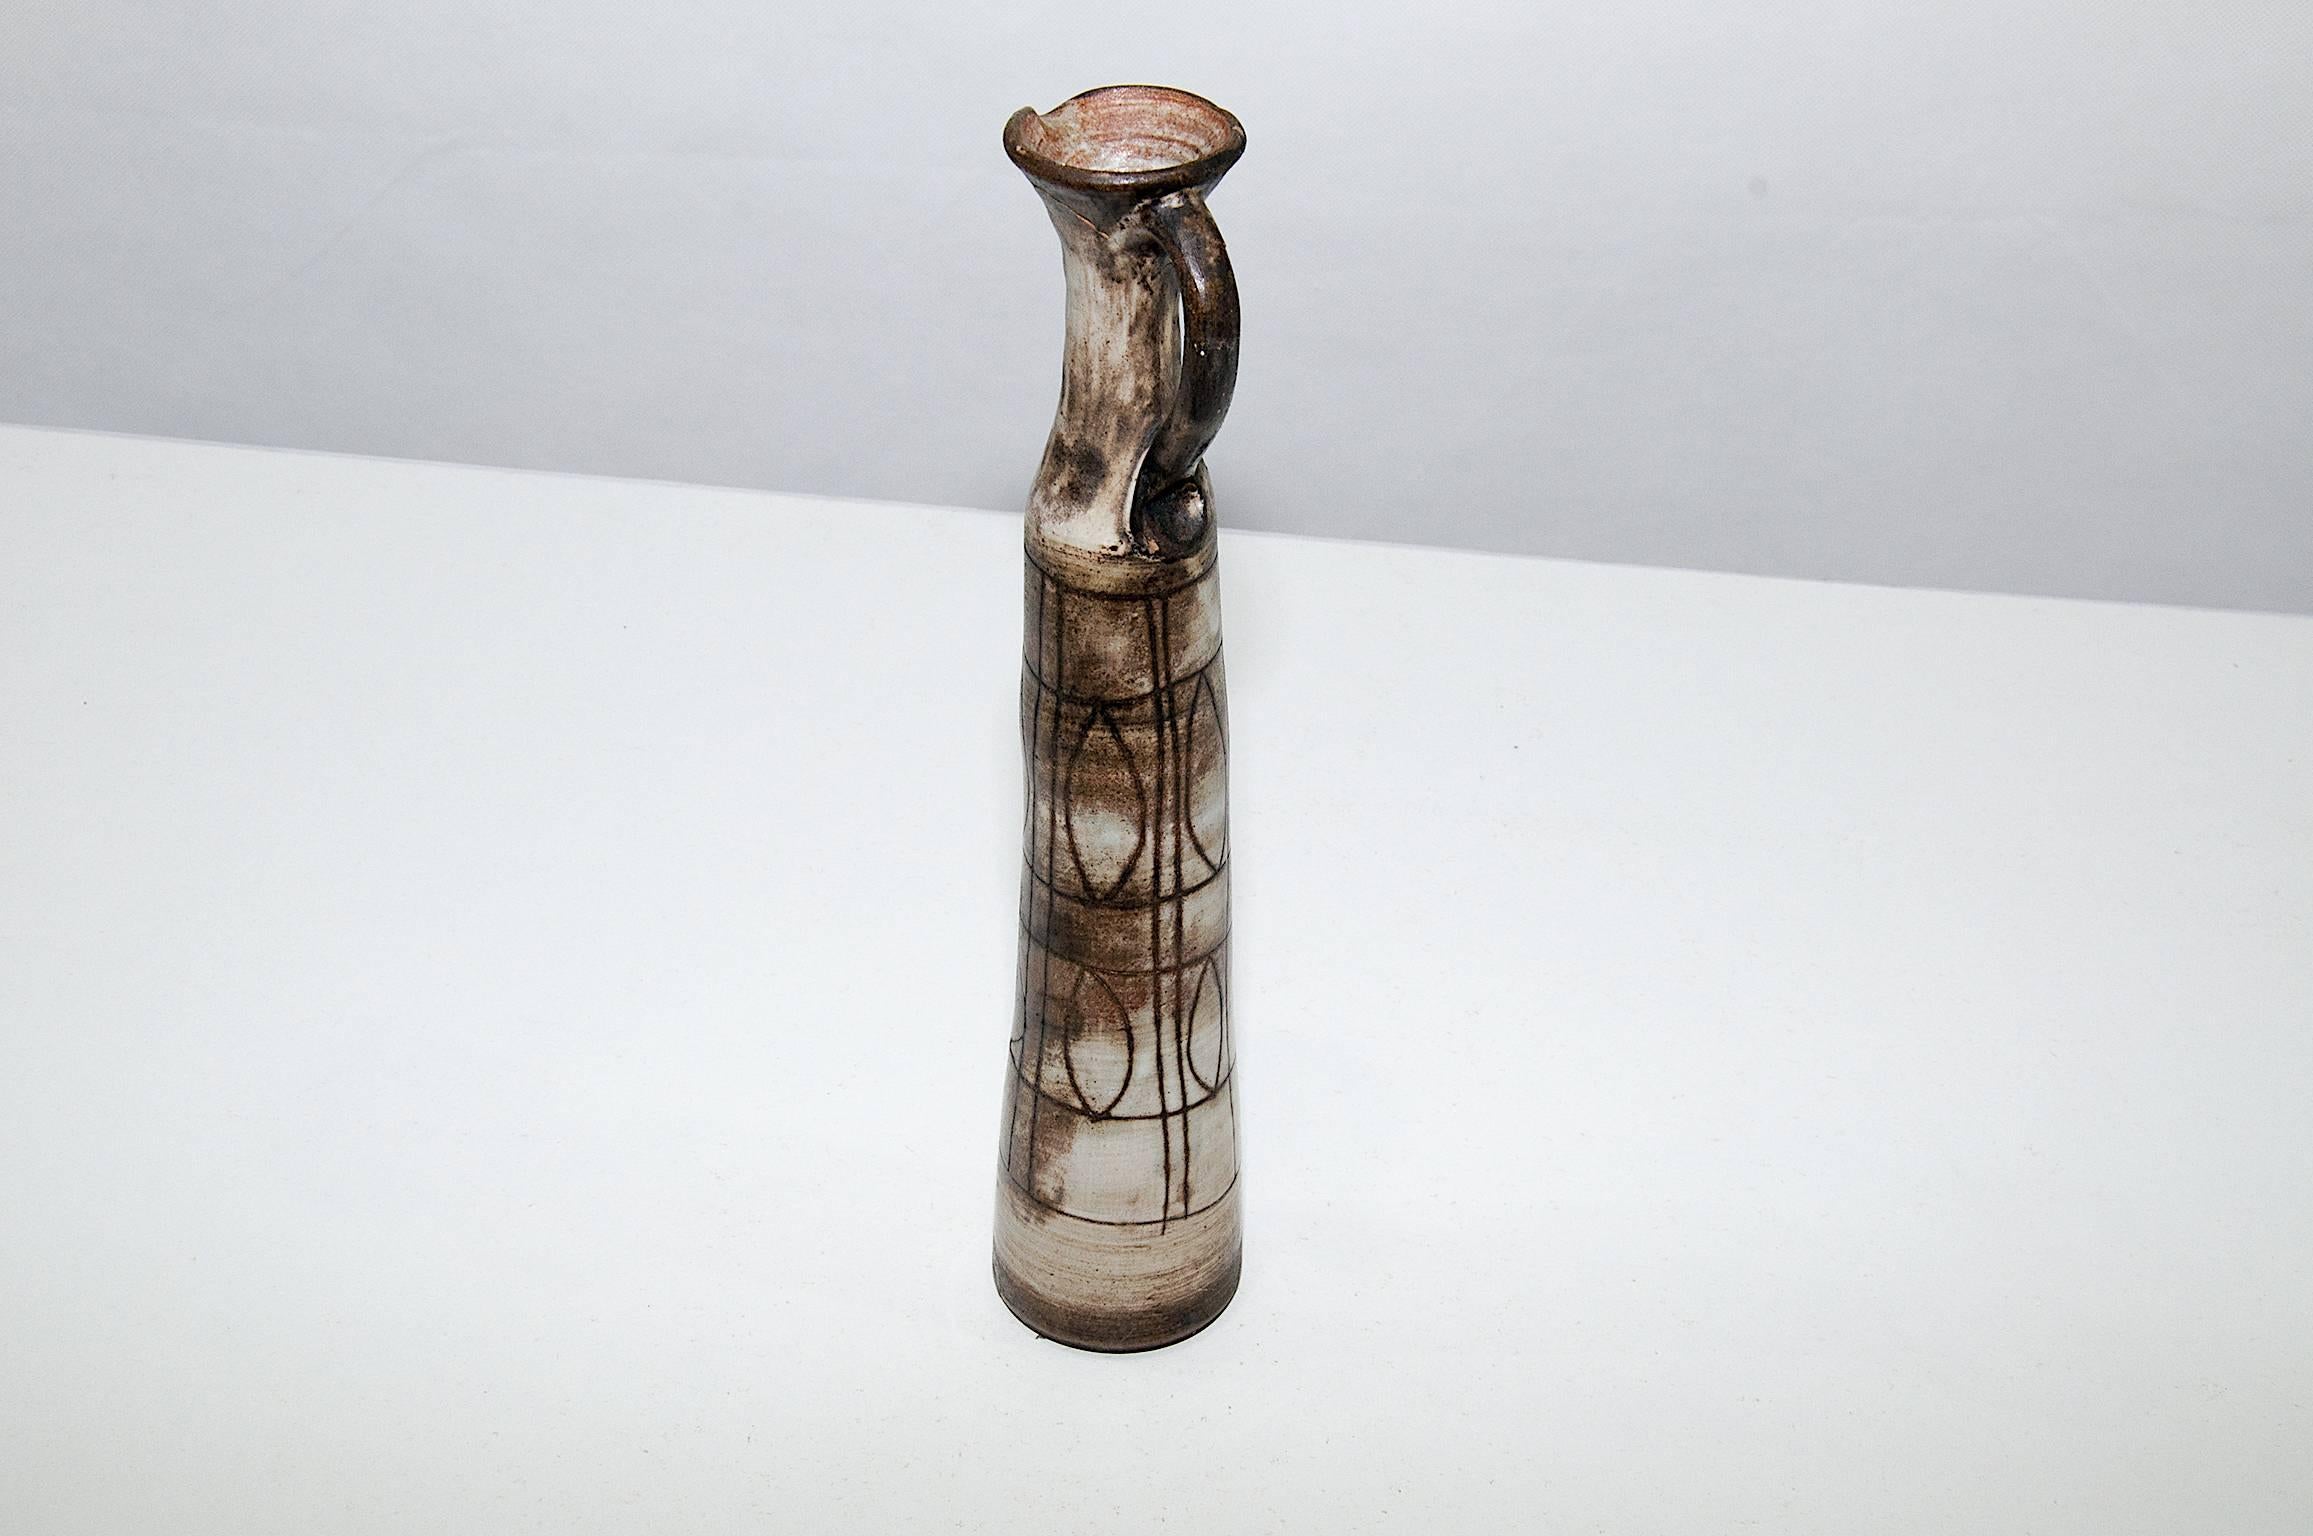 This vase has been designed by Jacques Pourchain in the 1950s-1960s.
Jacques Pouchain was a famous Ceramist in south of France, in Dieulefit.
The techniques used by the artist, is with Sgraffito motifs, done in enameled overlay in a white color,